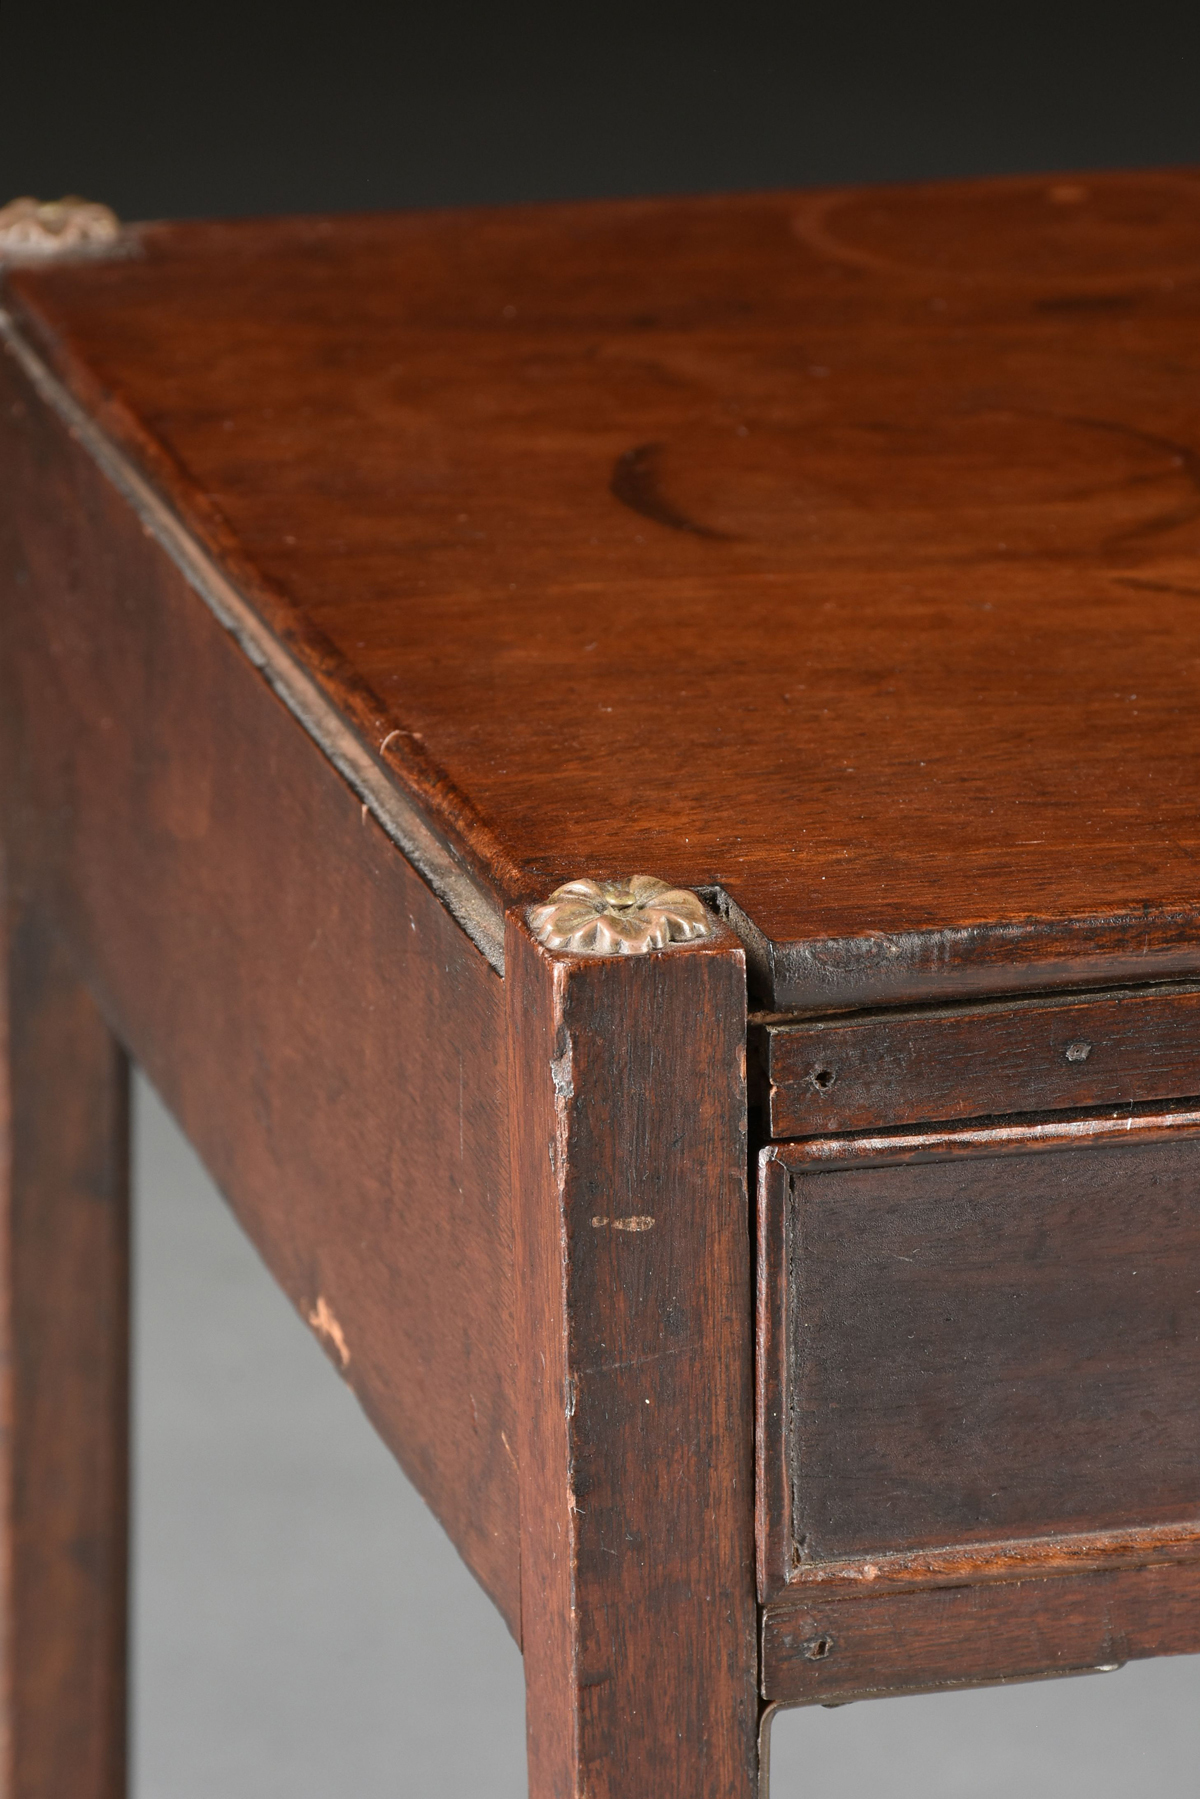 A GEORGE III MAHOGANY LOW SIDE TABLE, LATE 18TH/EARLY 19TH CENTURY, the rectangular top above a - Image 4 of 6